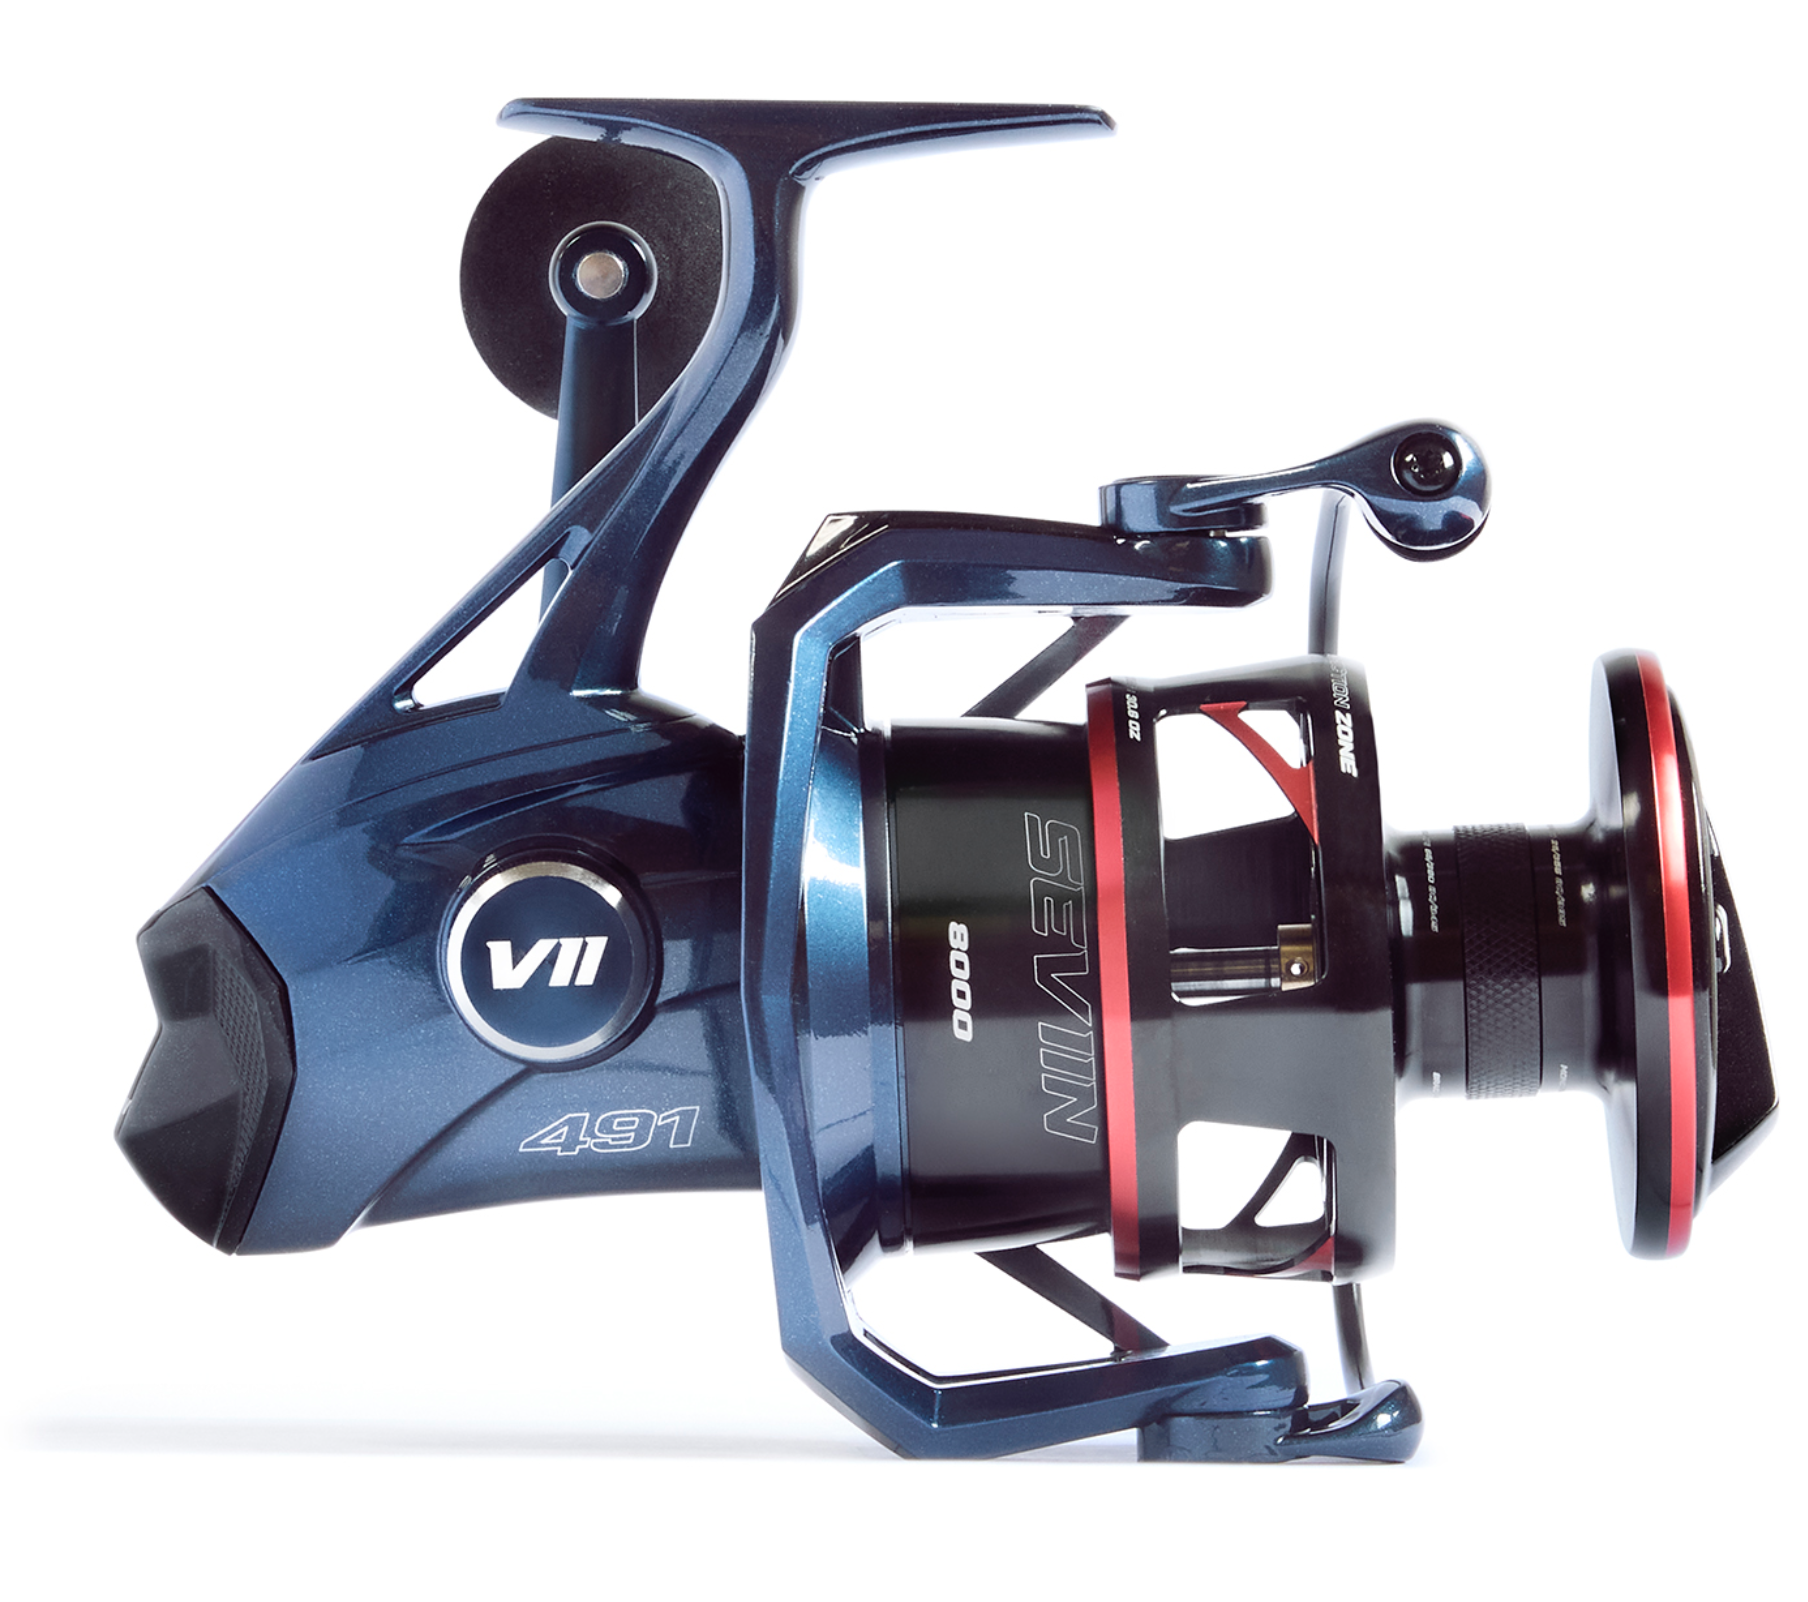 Keep Your Fishing Reels Protected